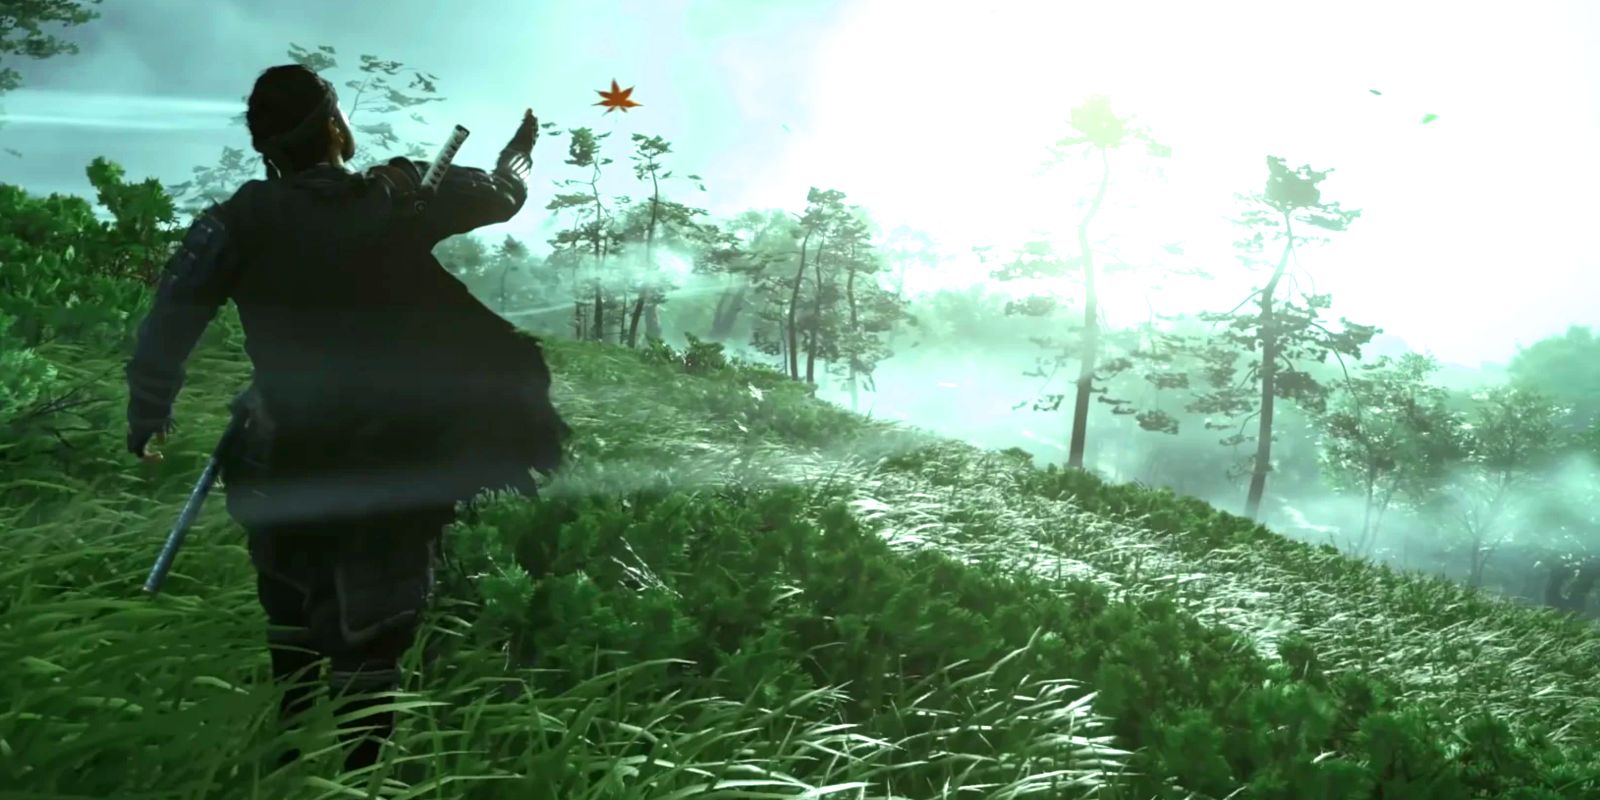 The protagonist of Ghost of Tsushima follows the guiding wind.